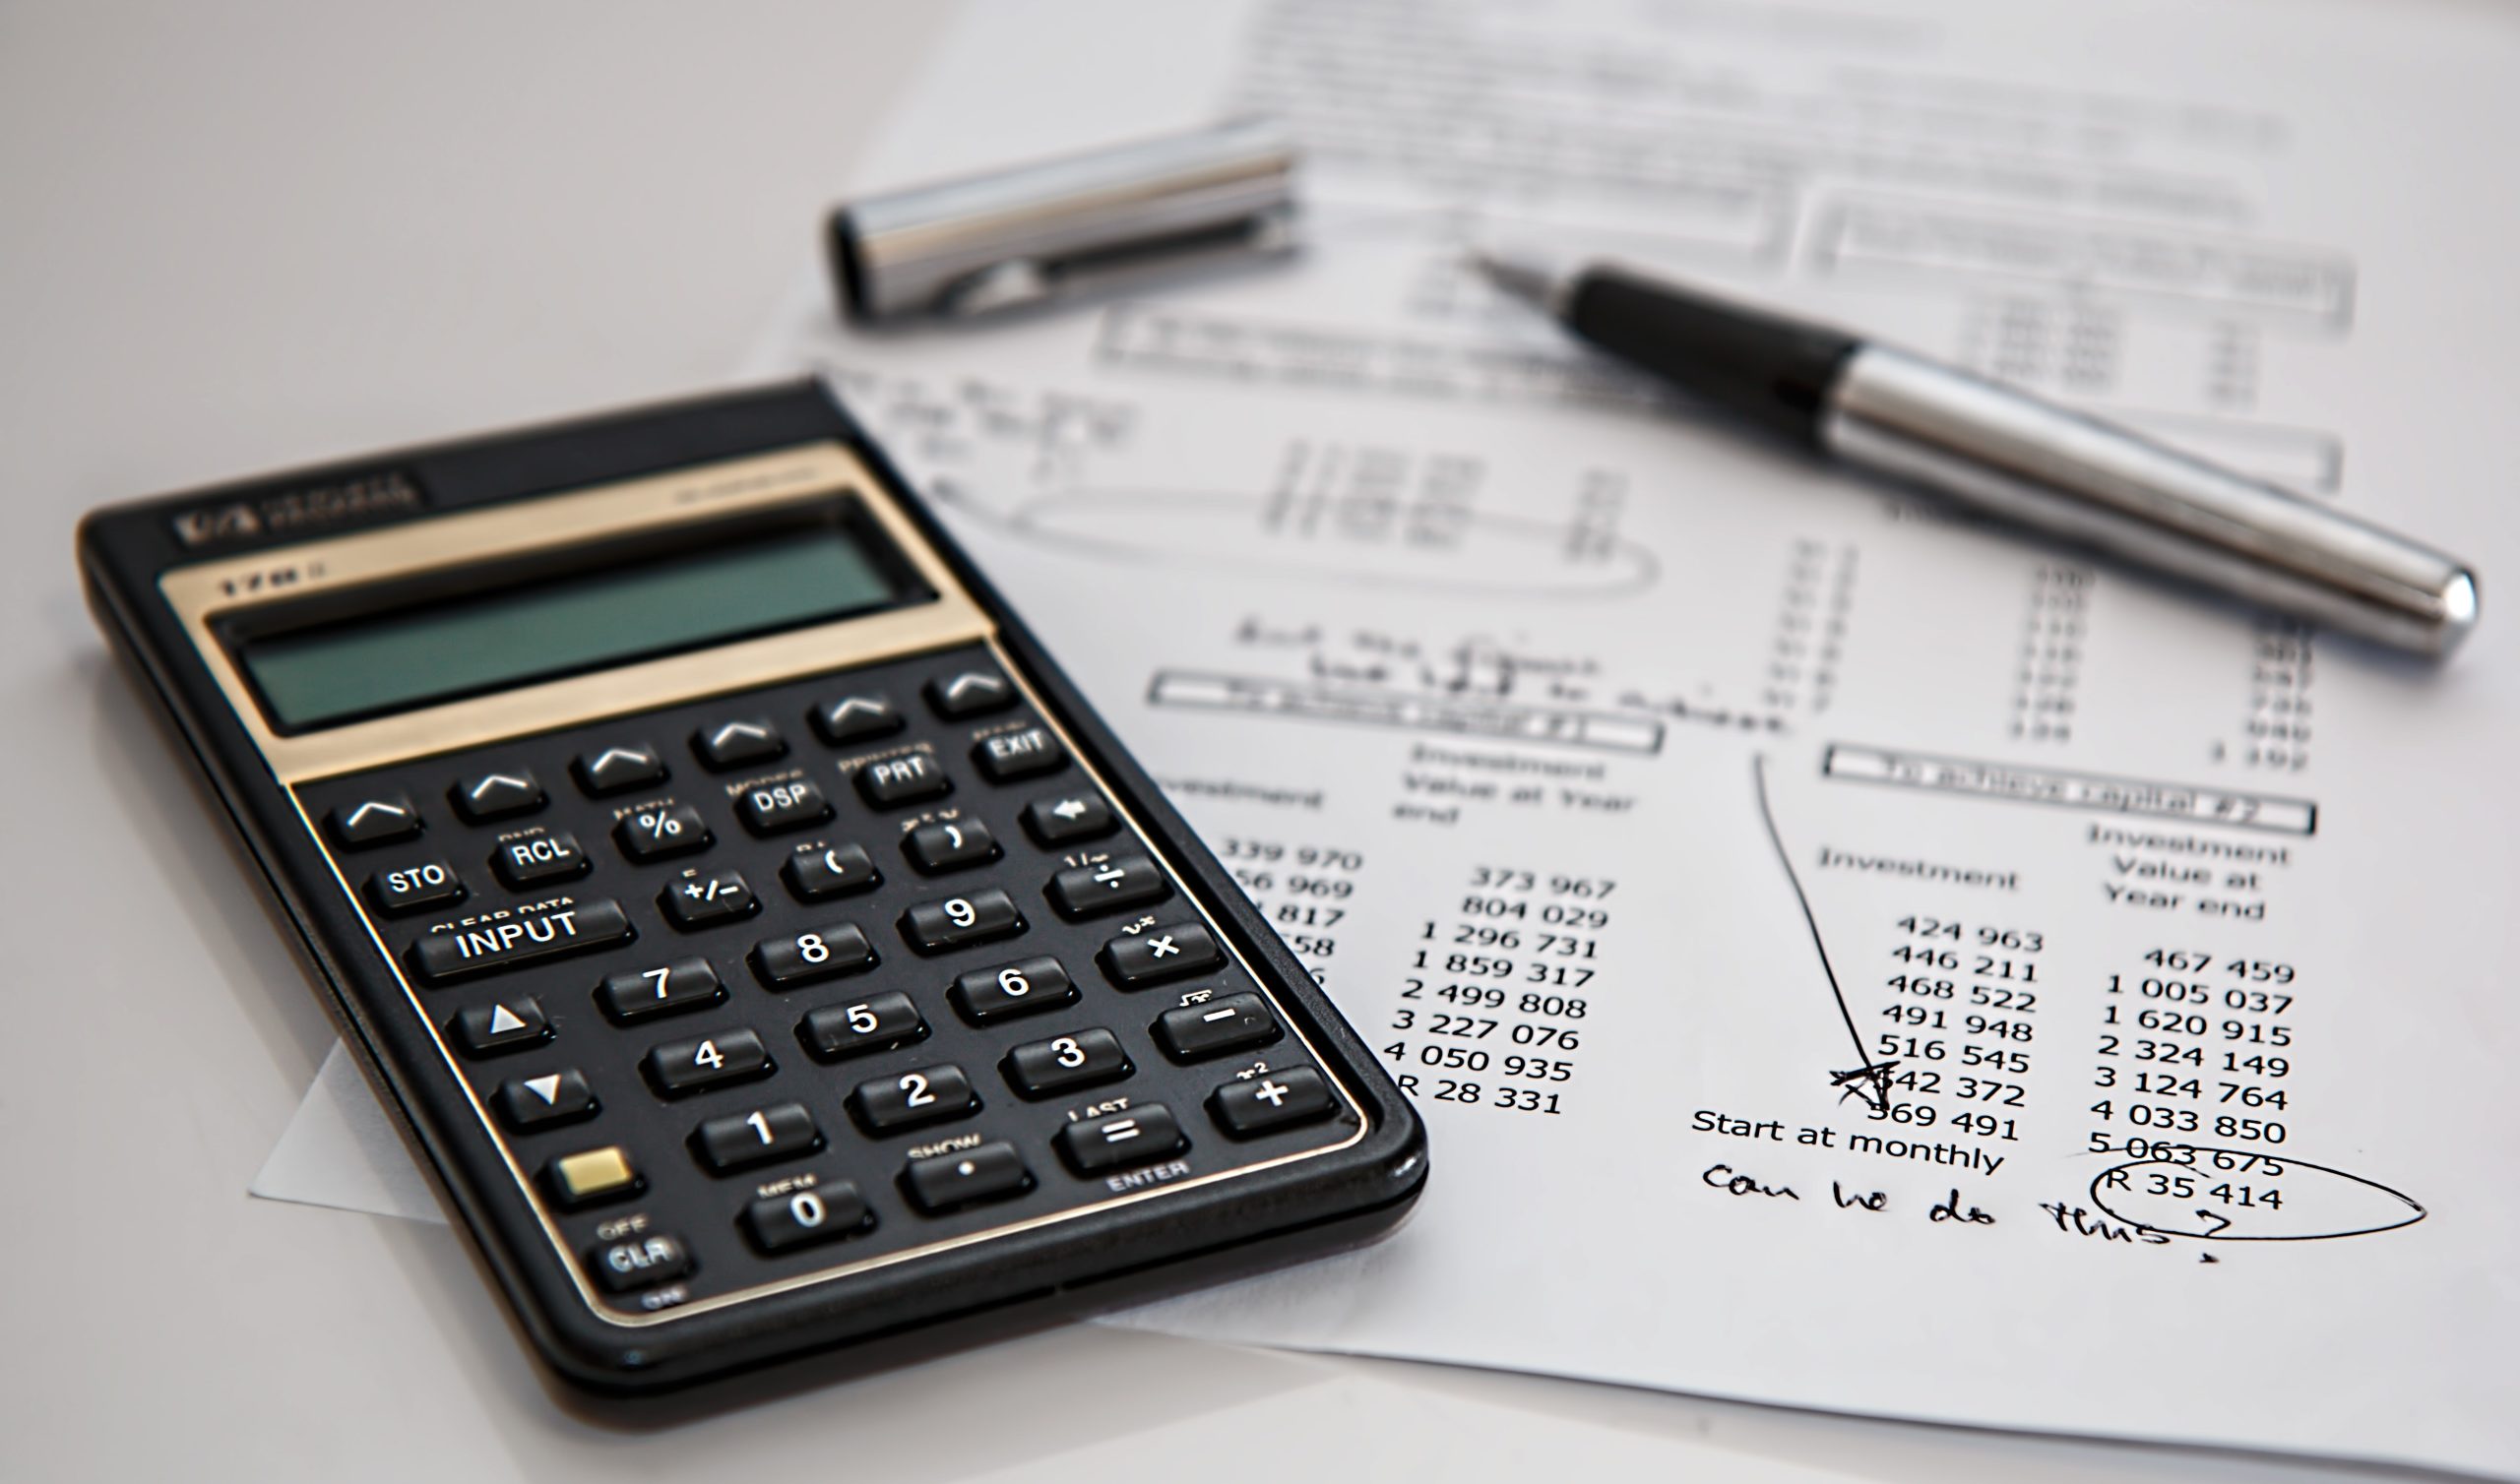 “The Importance of Accurate Bookkeeping in Small Business Finance